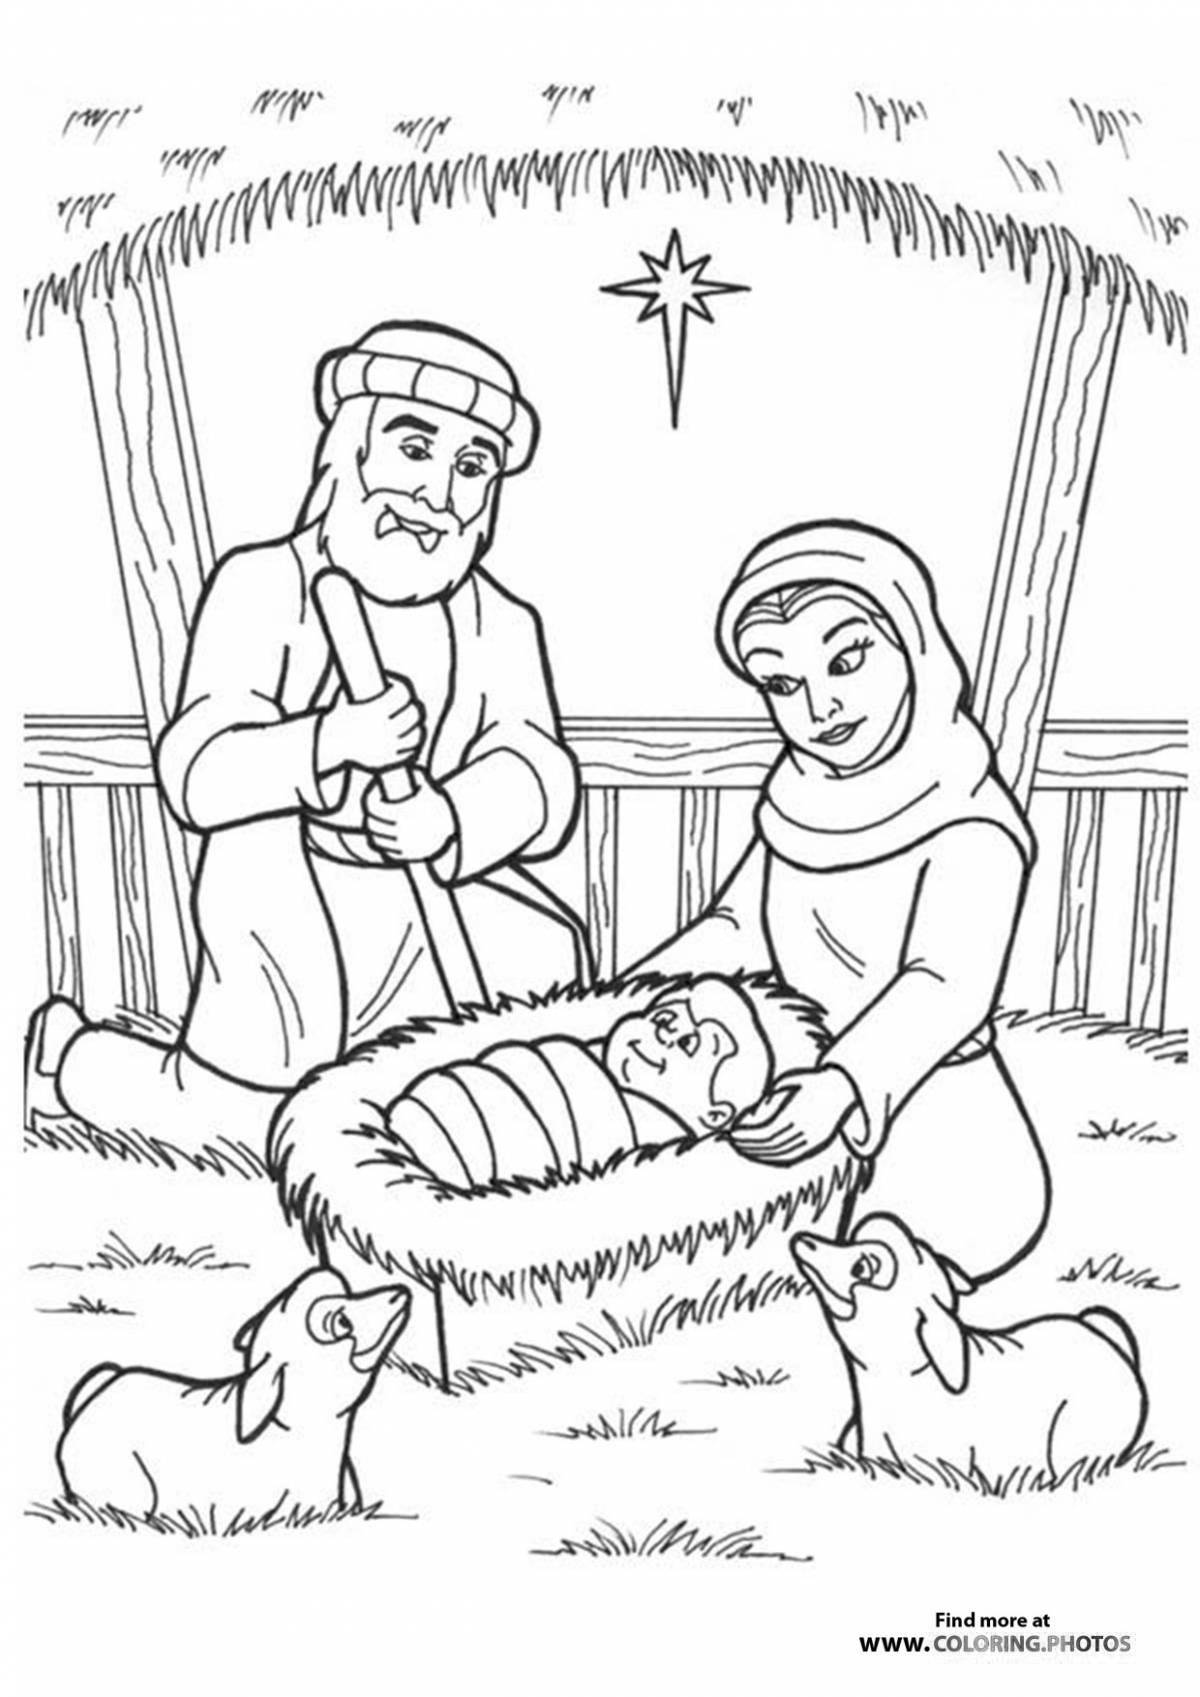 Luminous coloring of the birth of Jesus Christ for children